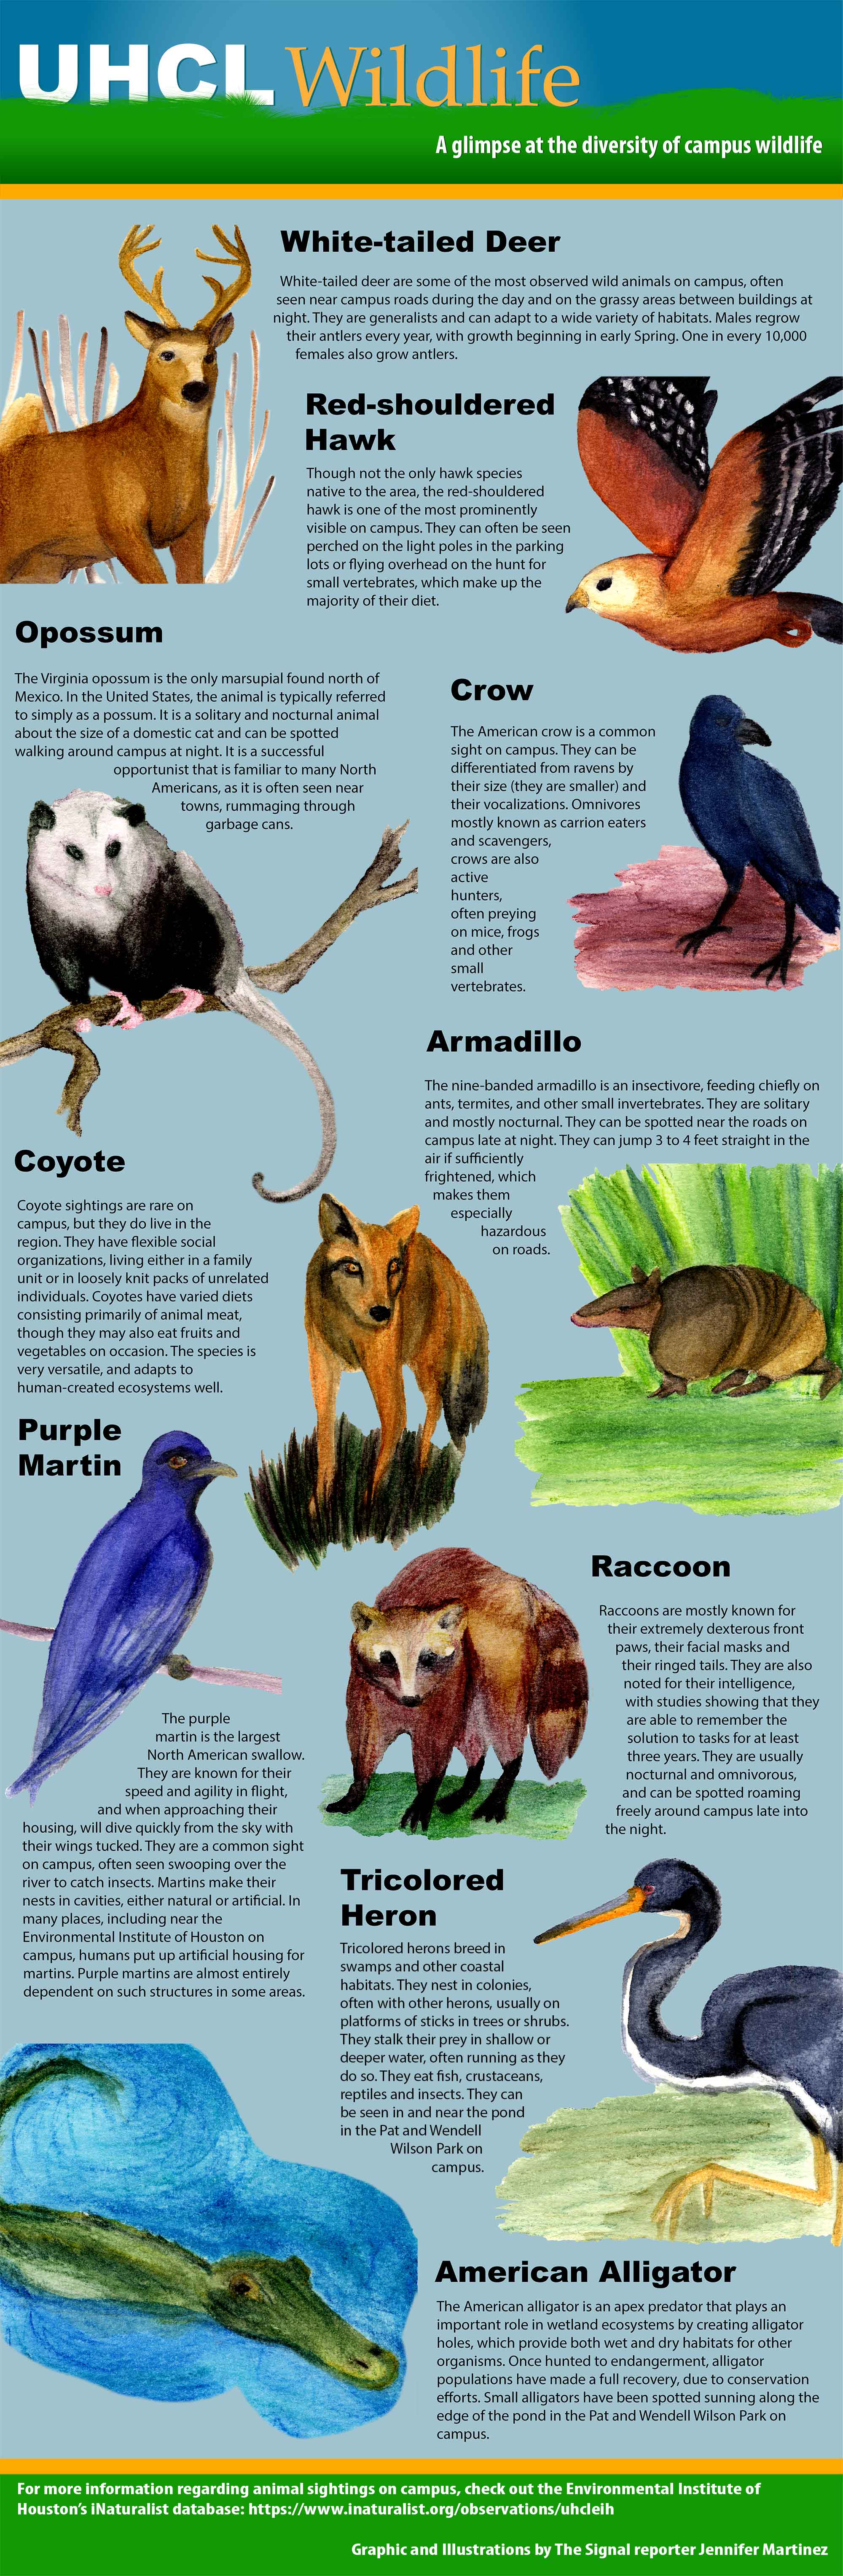 GRAPHIC: Combined computer and traditional illustration depicting various wildlife found at UHCL, including brief facts to go along with the images of animals. Animals include: white-tailed deer, red-shouldered hawk, opossum, crow, coyote, armadillo, purple martin, raccoon, tricolored heron, and American alligator. Graphic and illustrations by The Signal reporter Jennifer Martinez.